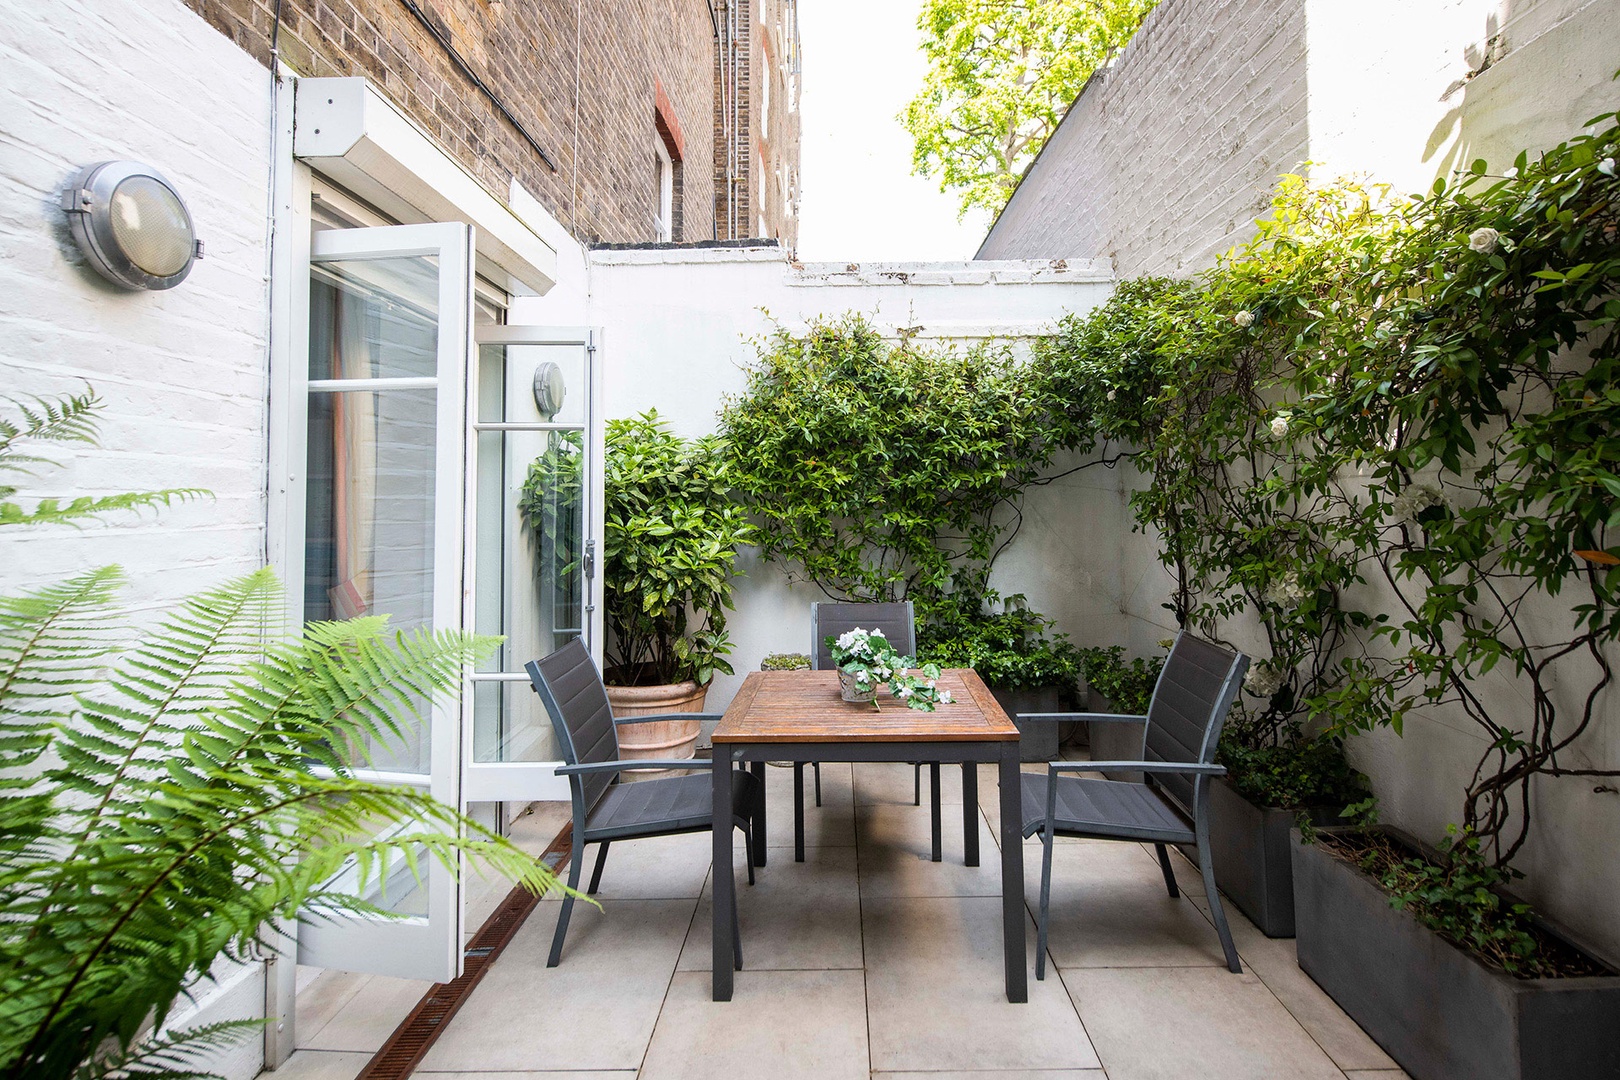 Step out onto the private patio garden just off the den